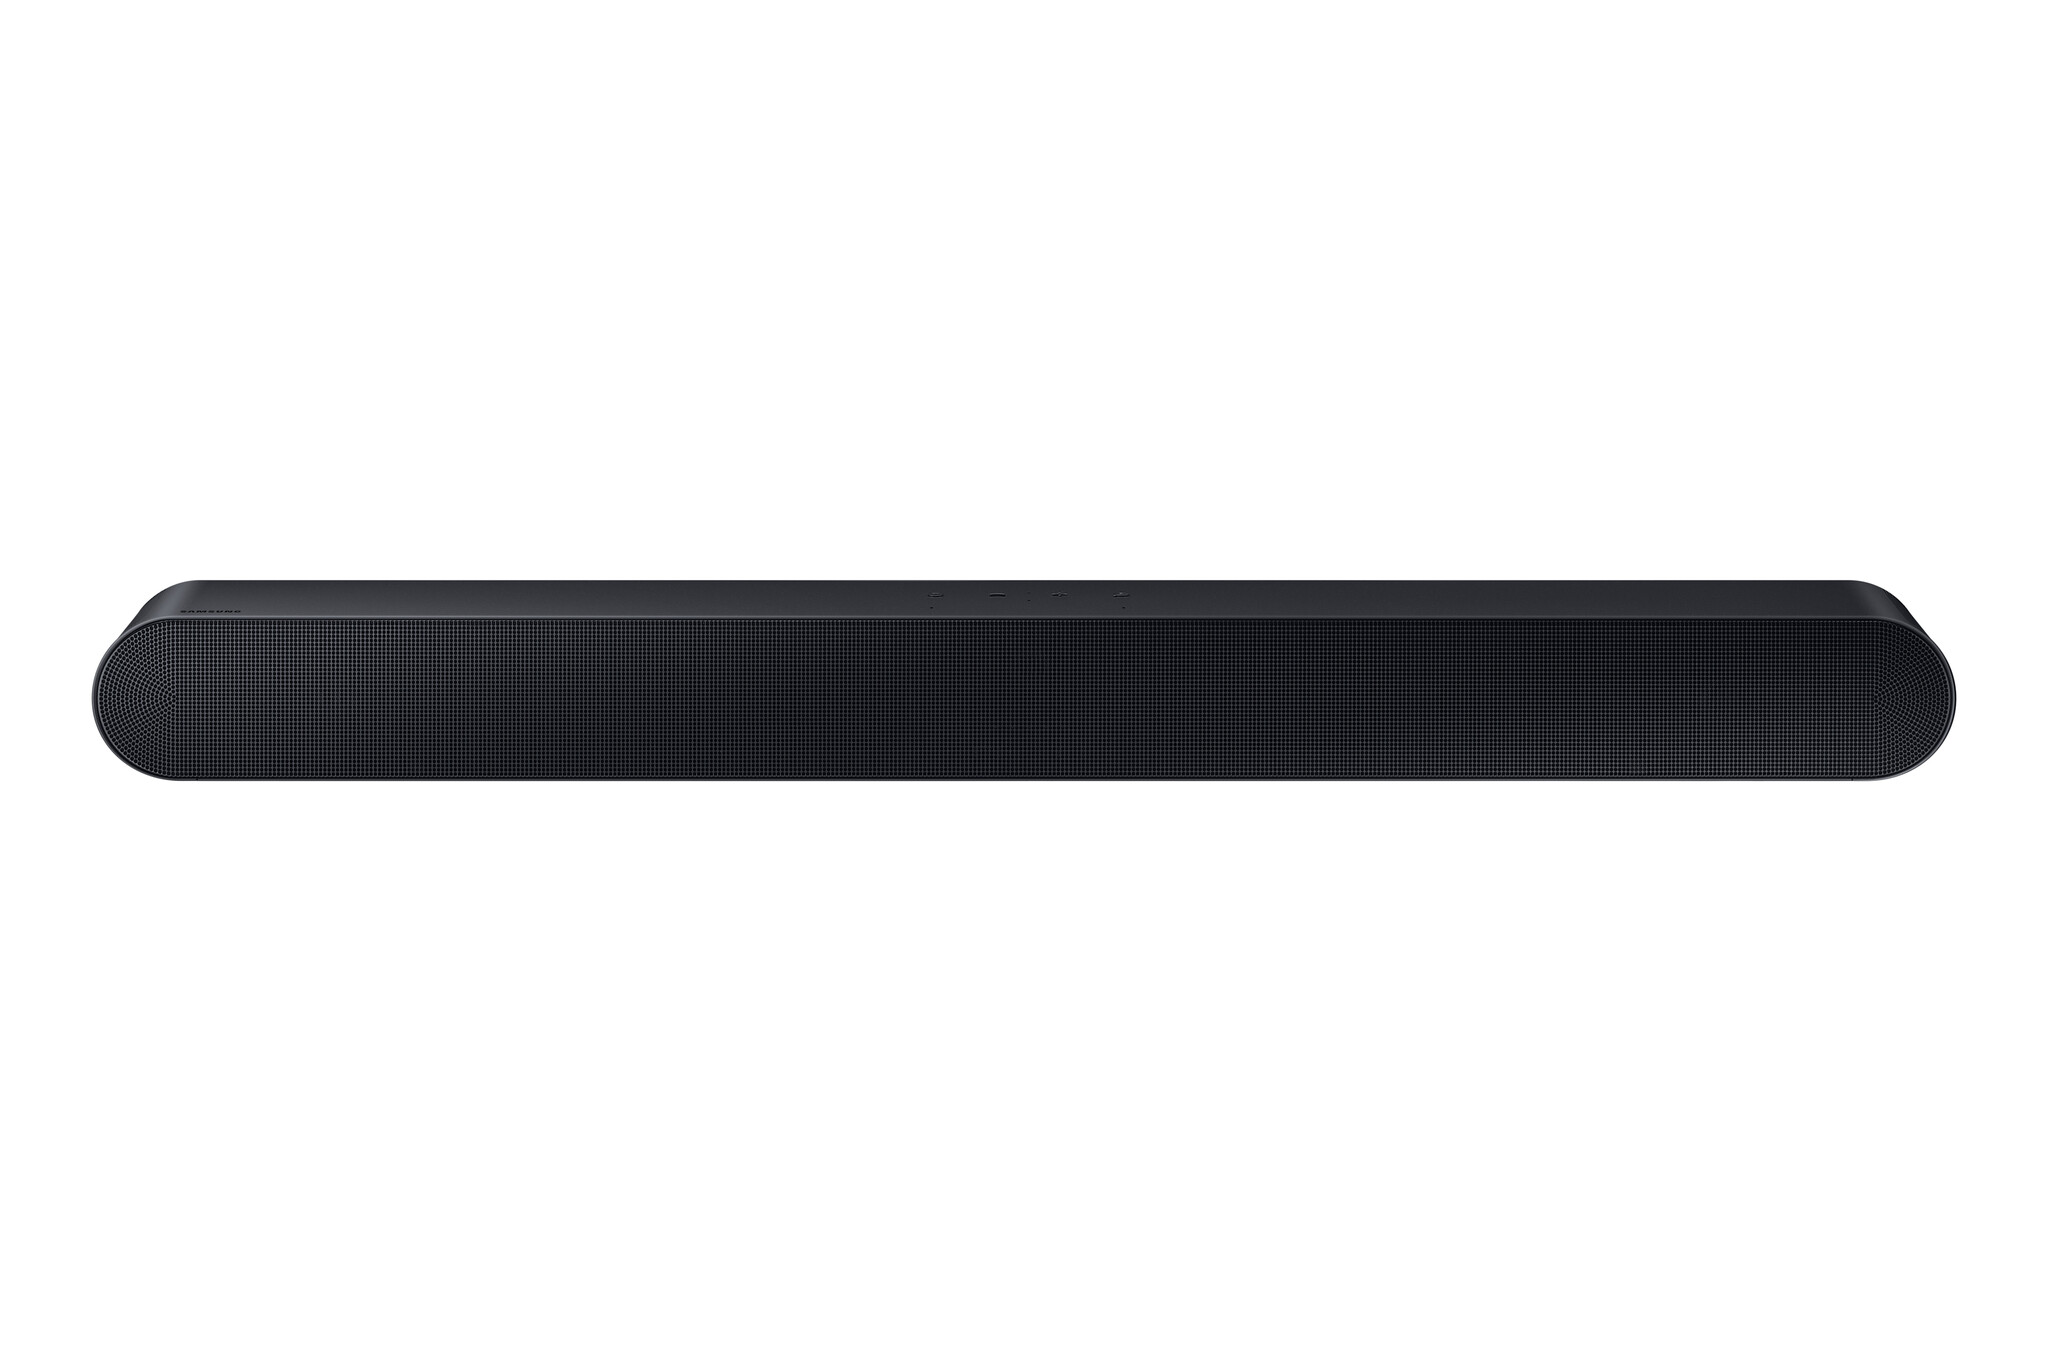 Samsung HW-S60B Bluetooth 5.0 Soundbar with Q-Symphony, Dolby Atmos® and DTS, and 7 Built-In Speakers #364318